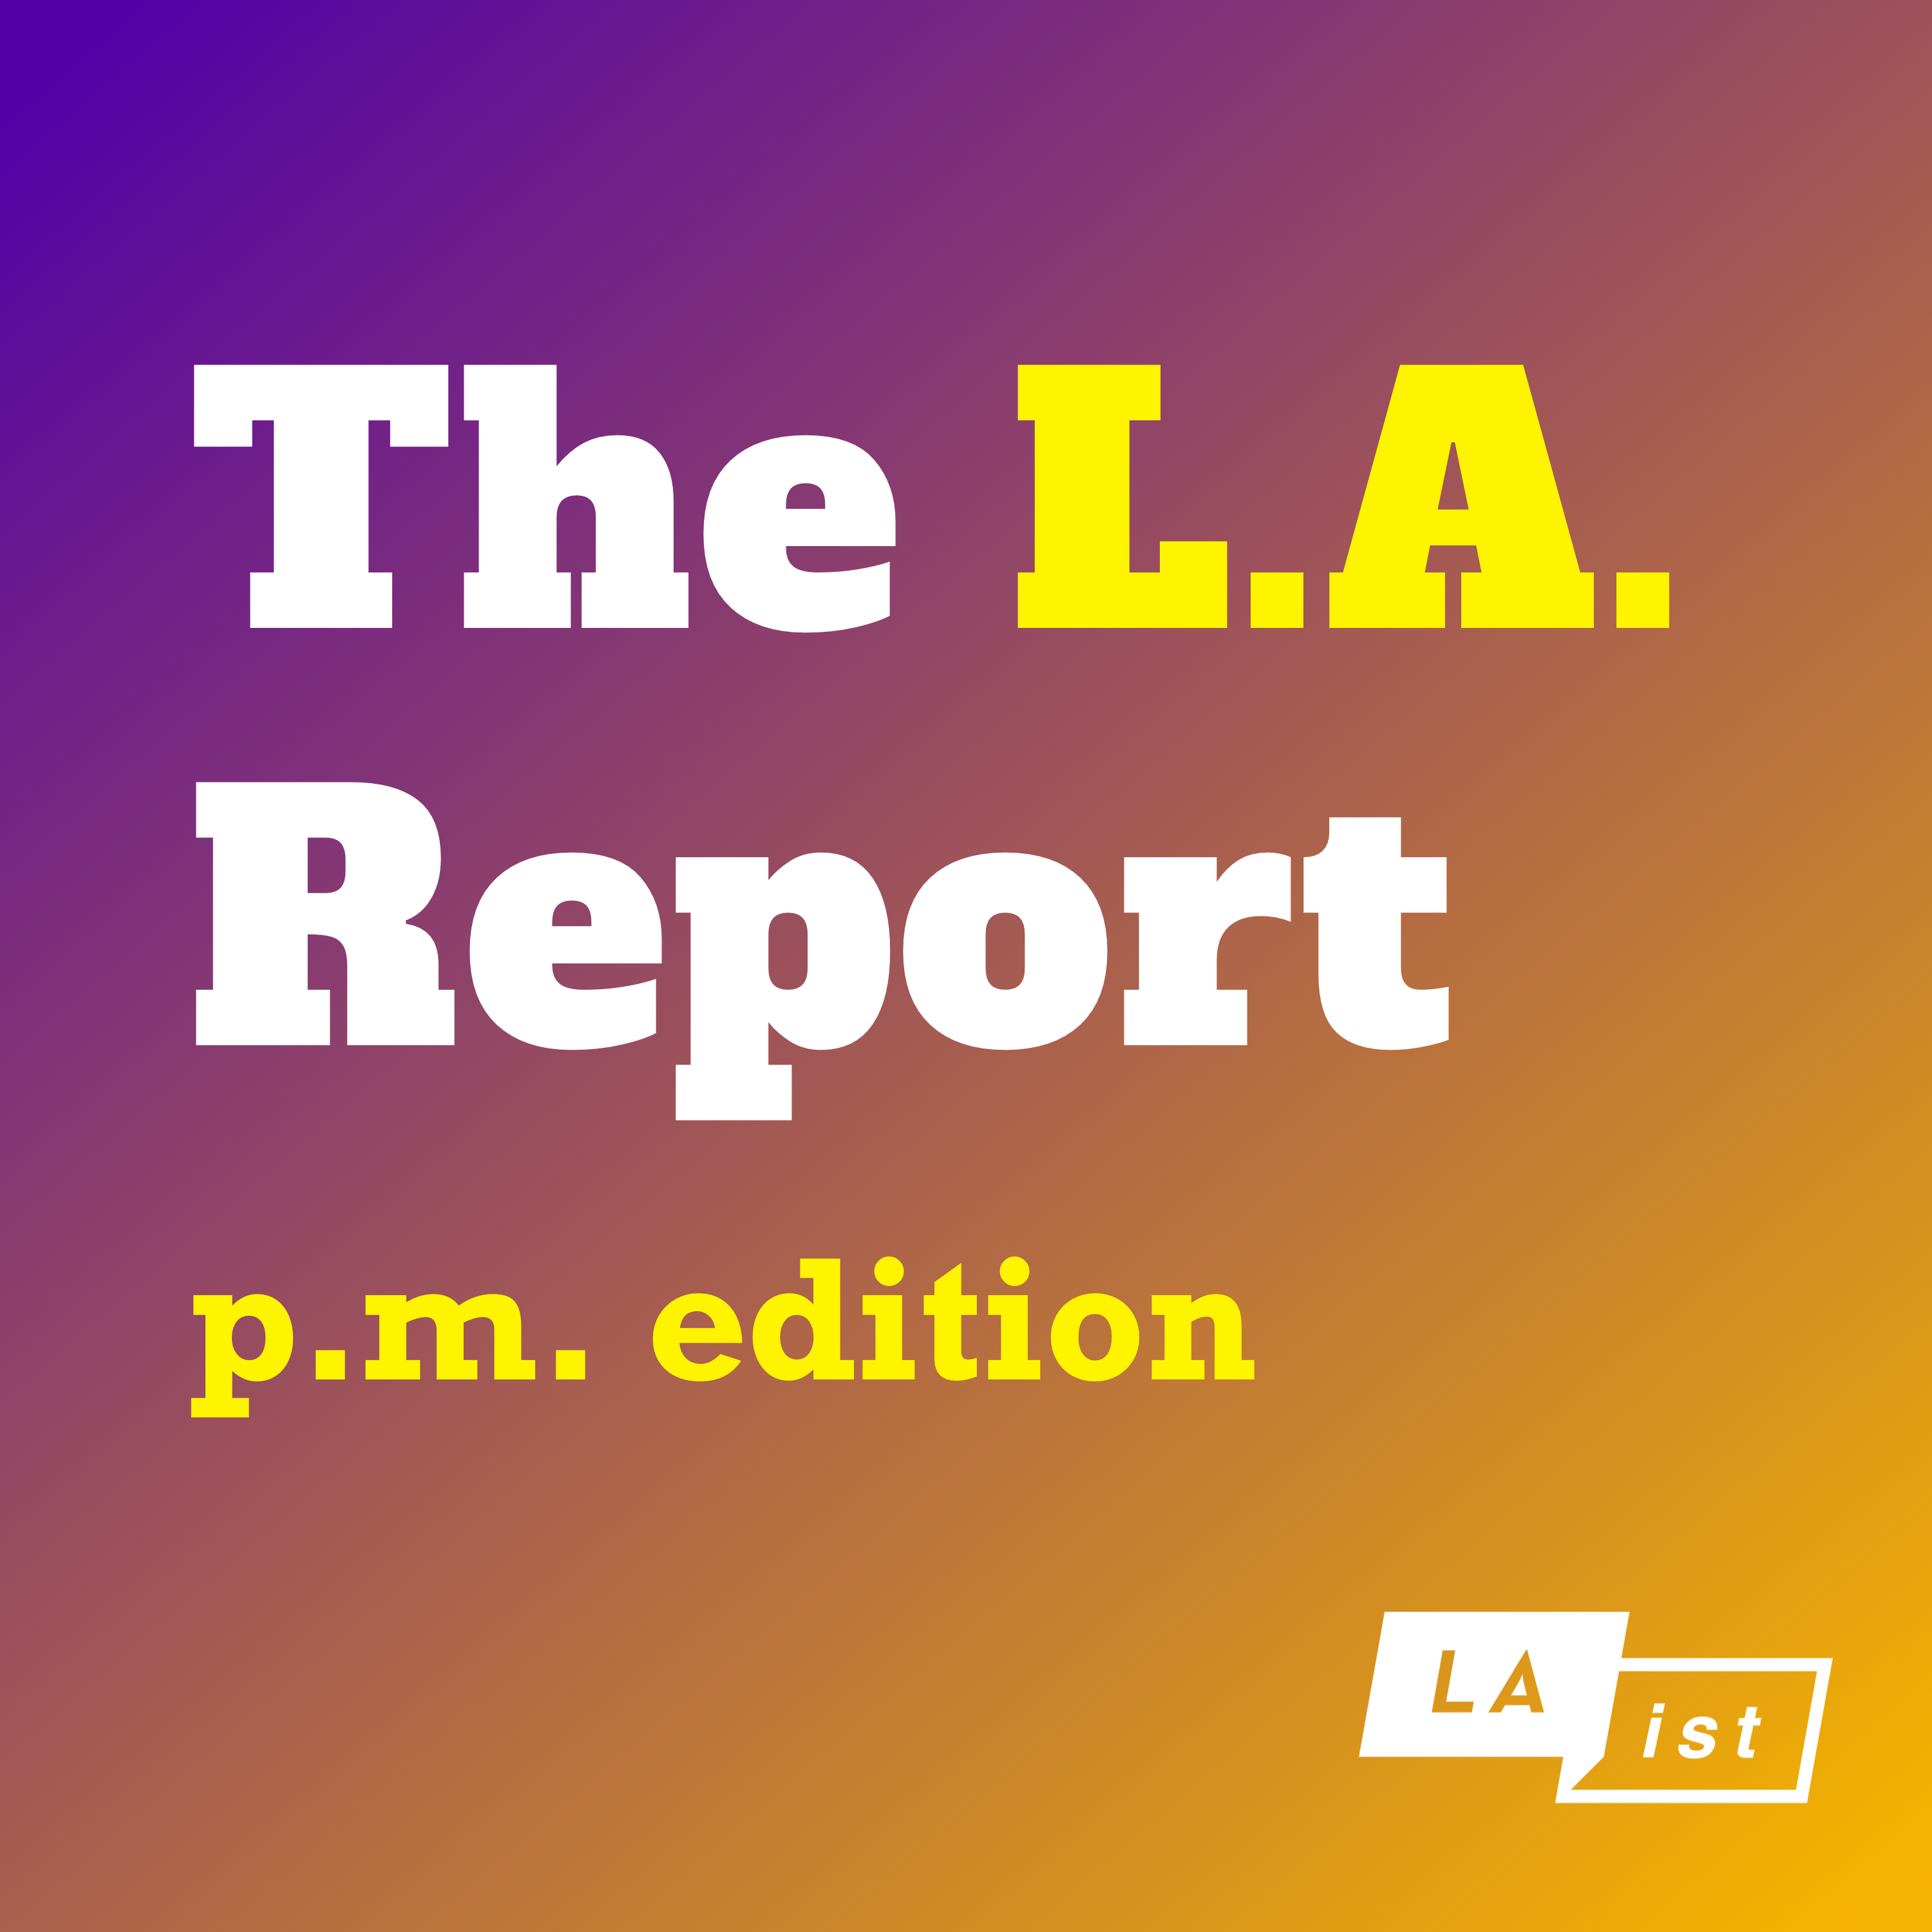 Latinos Experience Higher Rates Of “Doubled Up” Homelessness, Catalina Island’s Deer Plan Gets Scrapped, & Hollywood Is Losing TV Jobs — The P.M. Edition